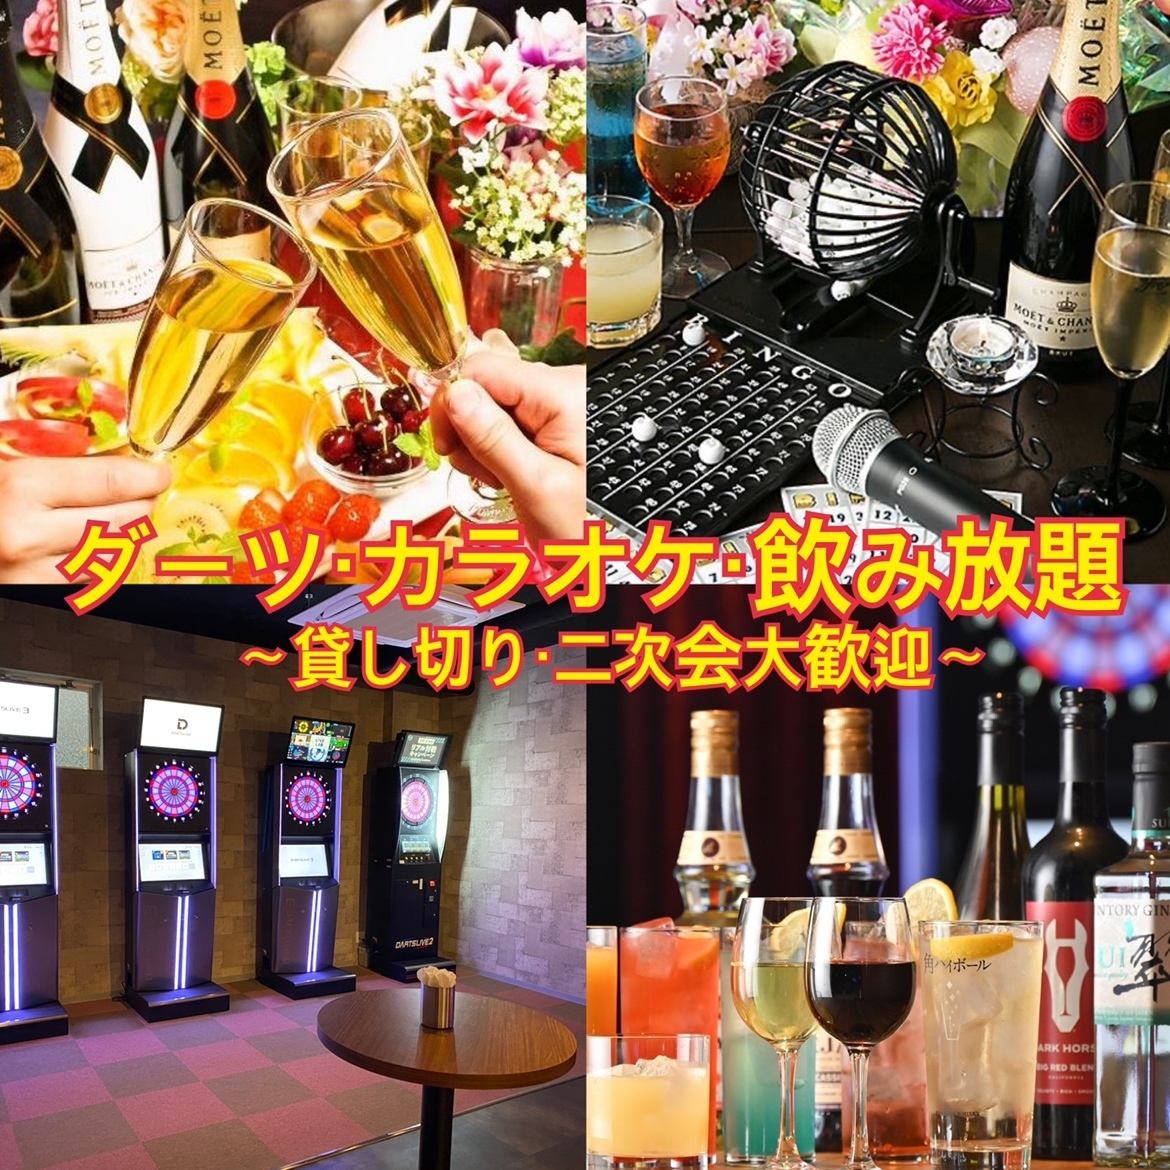 If you want to enjoy darts and karaoke at a cost-effective price, go to Delta ♪